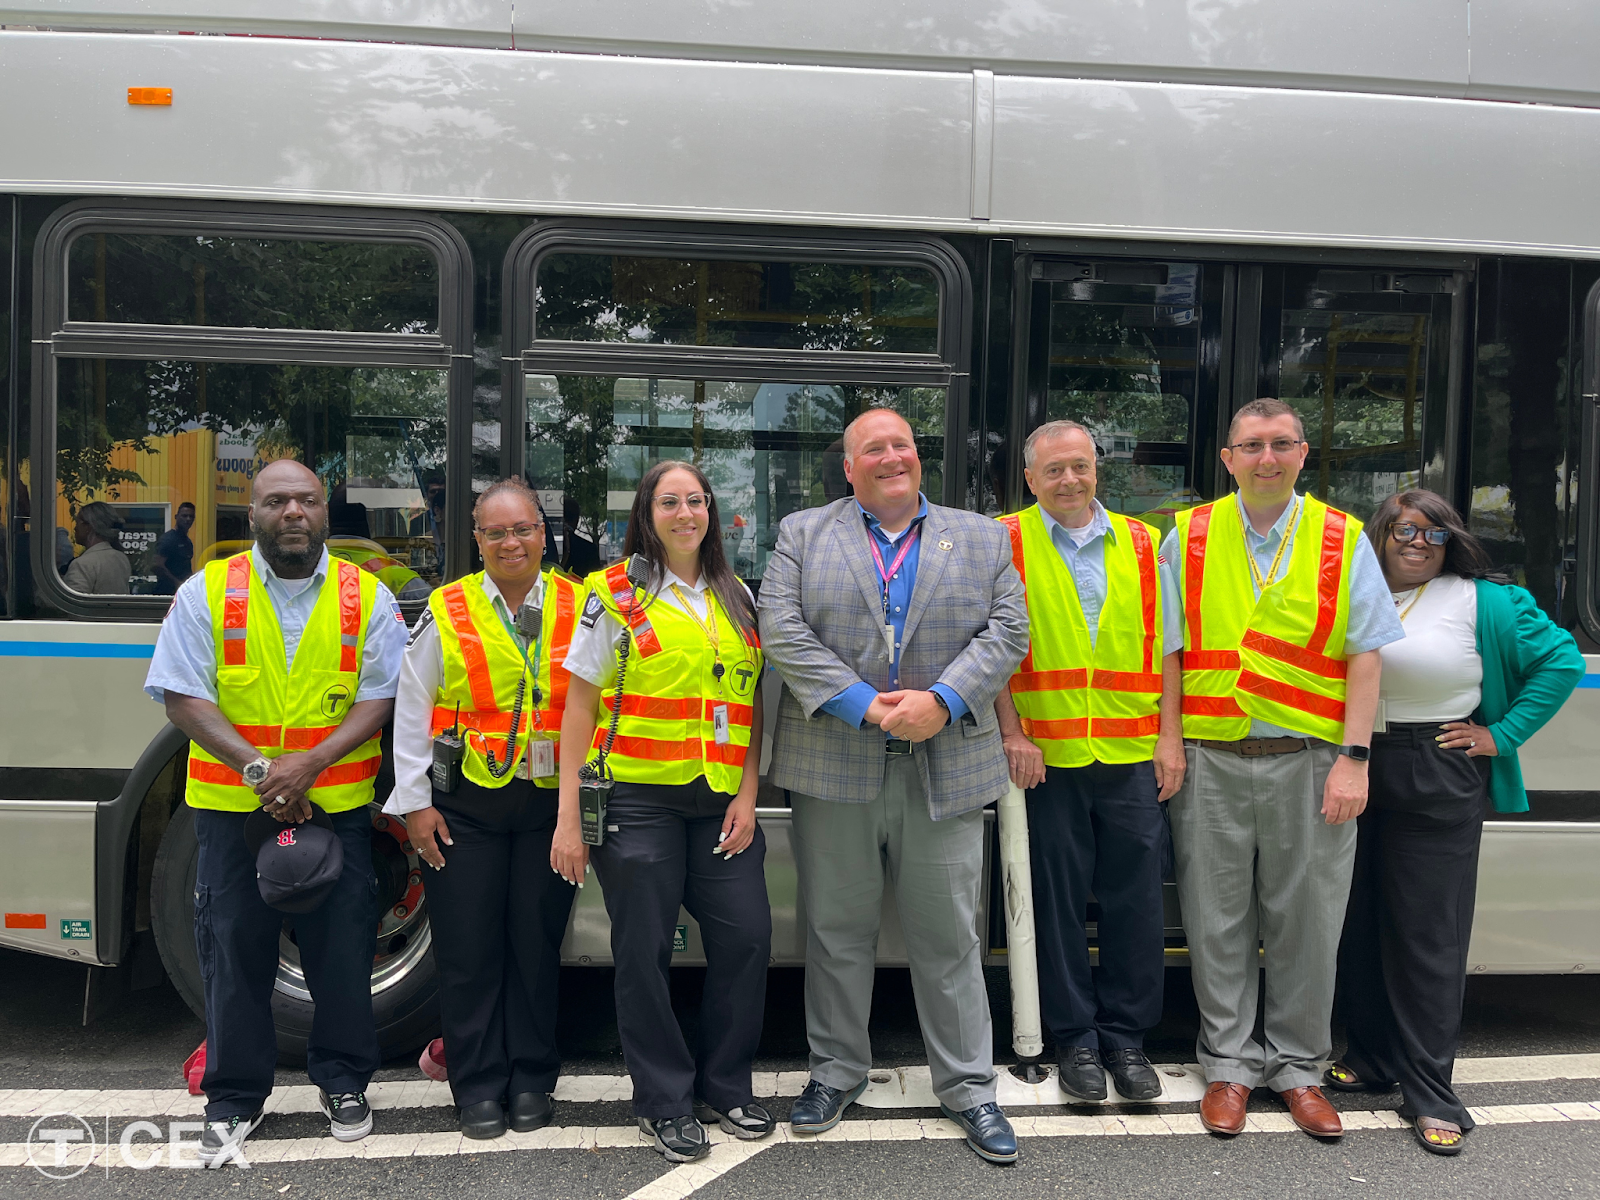 Seven individuals pose smiling in front of a bus. Several of the employees wear high visibility vests.